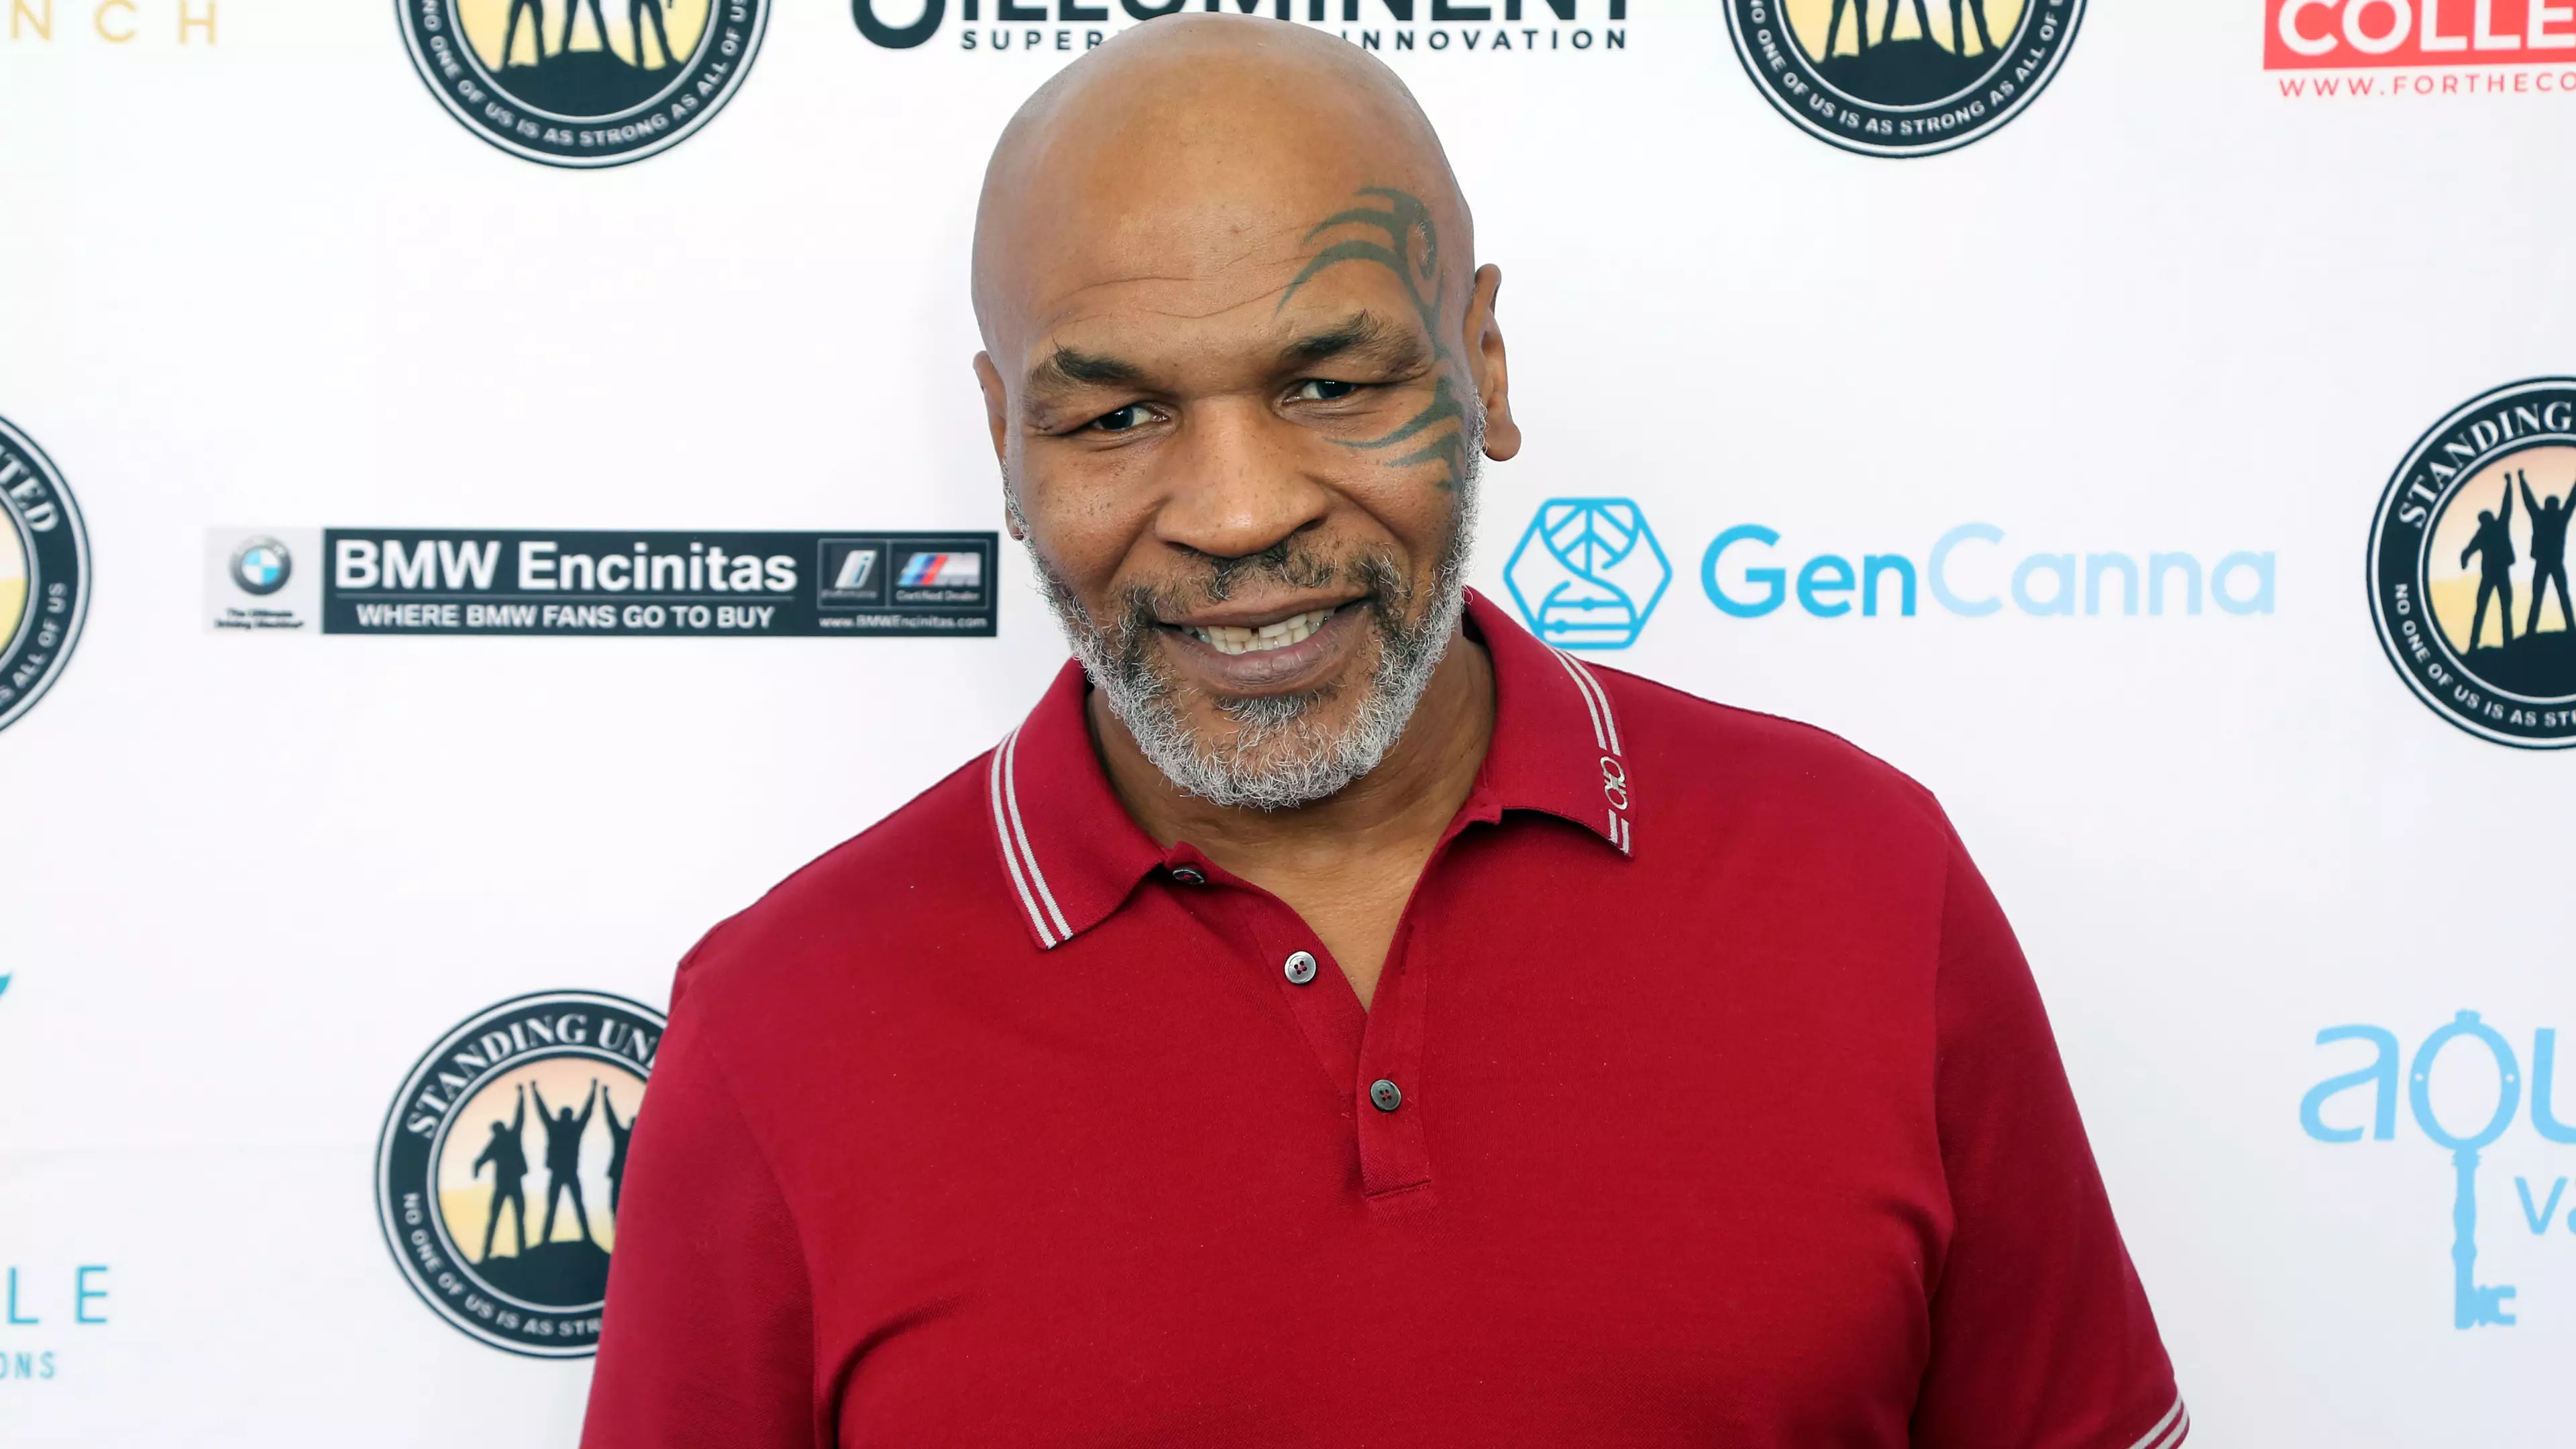 Mike Tyson Once Offered A Zookeeper $10,000 To Fight A Gorilla